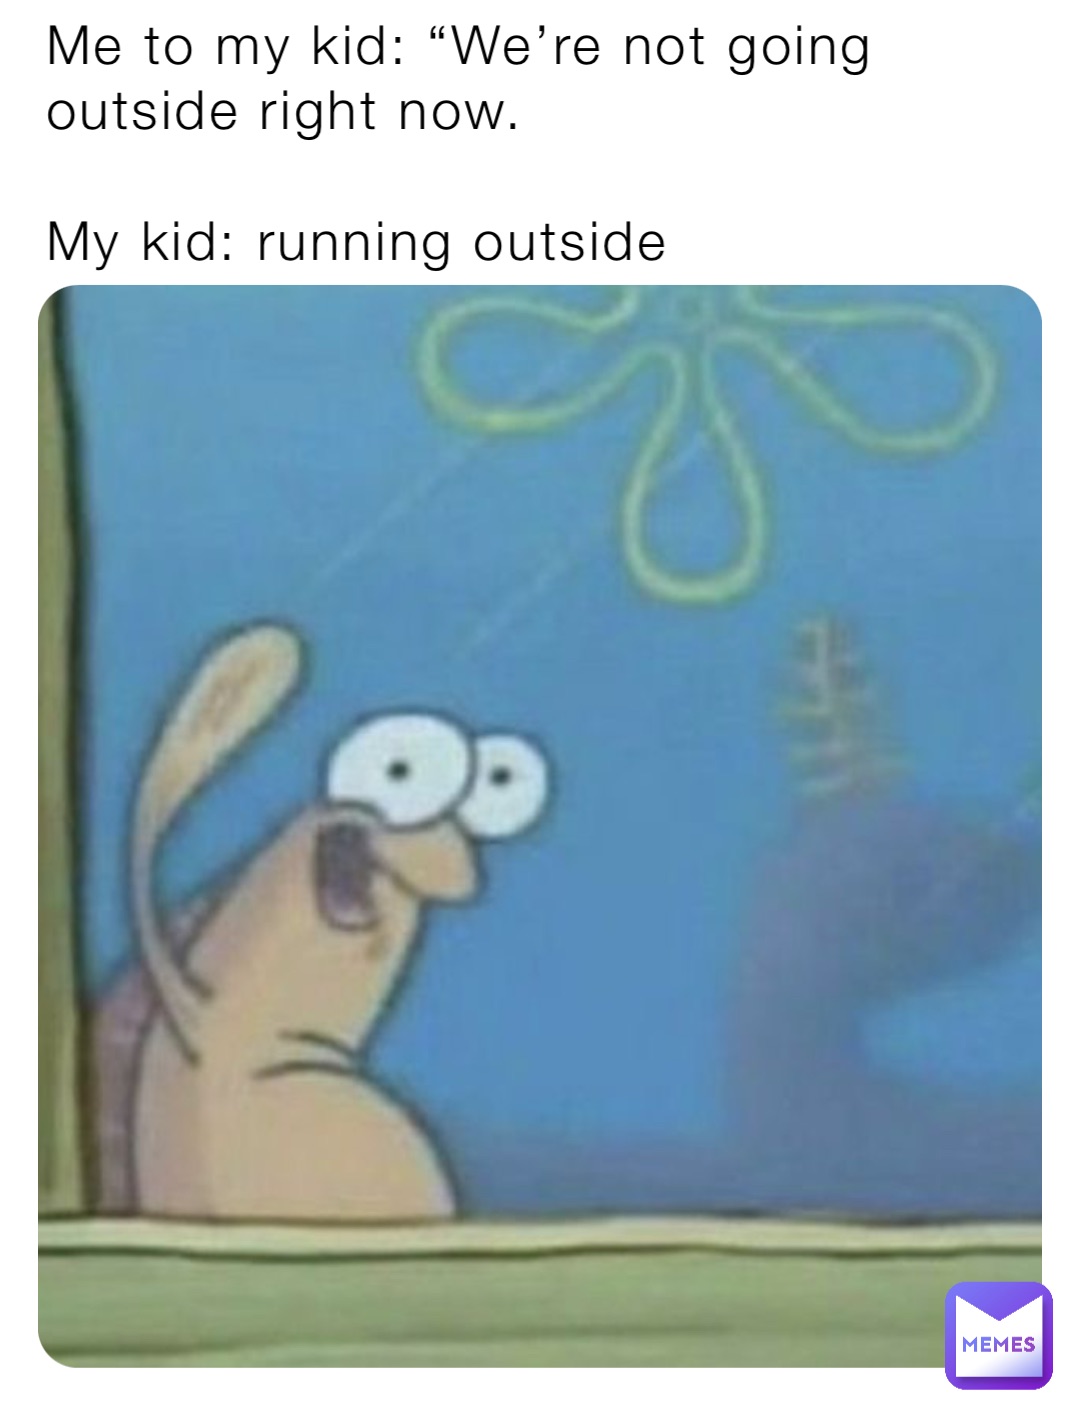 Me to my kid: “We’re not going outside right now. 

My kid: running outside